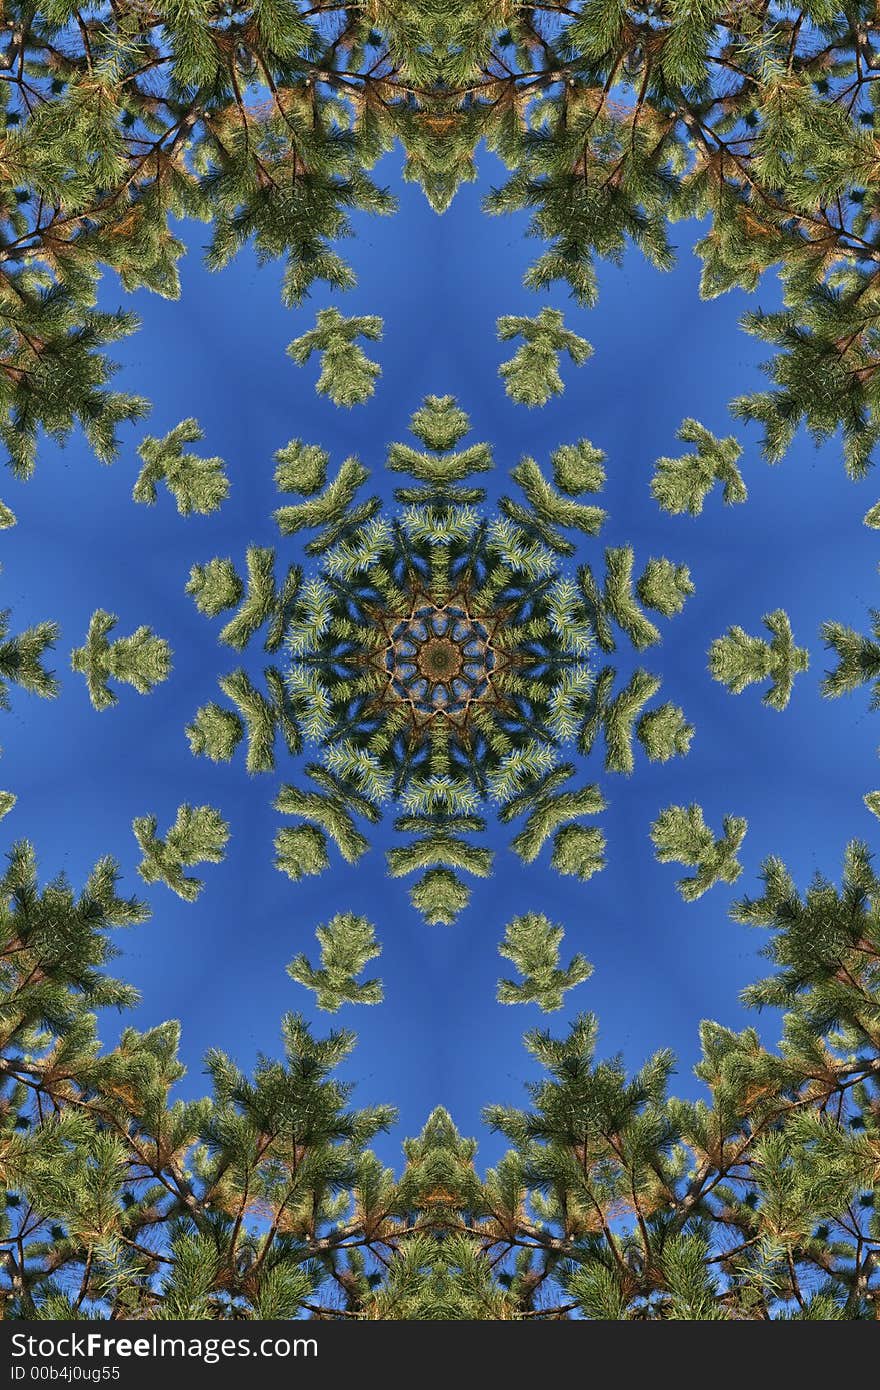 Unusual background with Christmas wreath kaleidoscope. Unusual background with Christmas wreath kaleidoscope